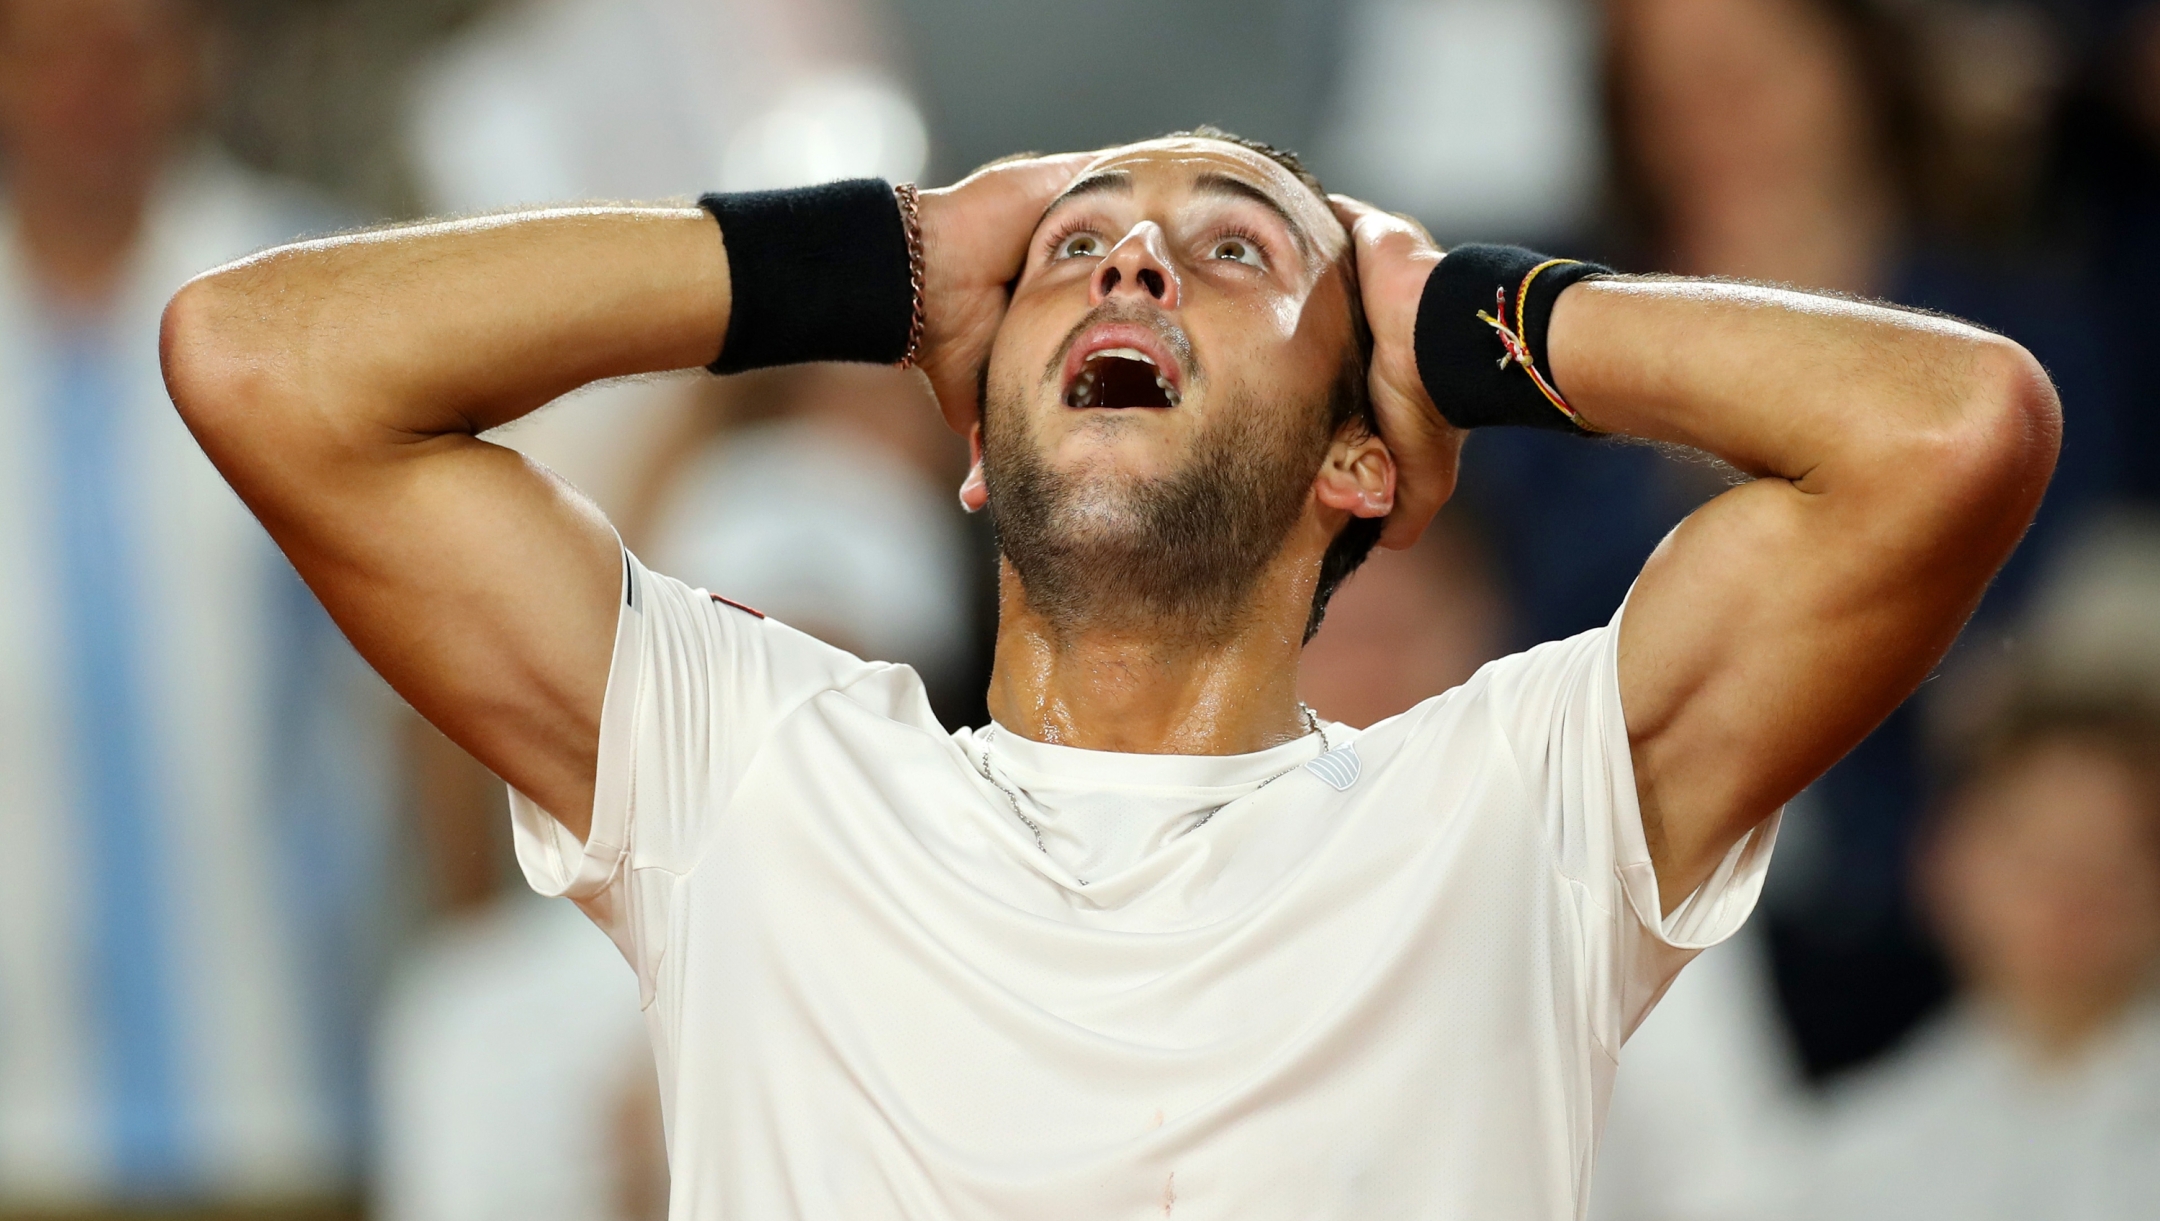 PARIS, FRANCE - JUNE 05: Tomas Martín Etcheverry of Argentina celebrates winning match point against Yoshihito Nishioka of Japan during the Men's Singles Fourth Round match on Day Nine of the 2023 French Open at Roland Garros on June 05, 2023 in Paris, France. (Photo by Lewis Storey/Getty Images)